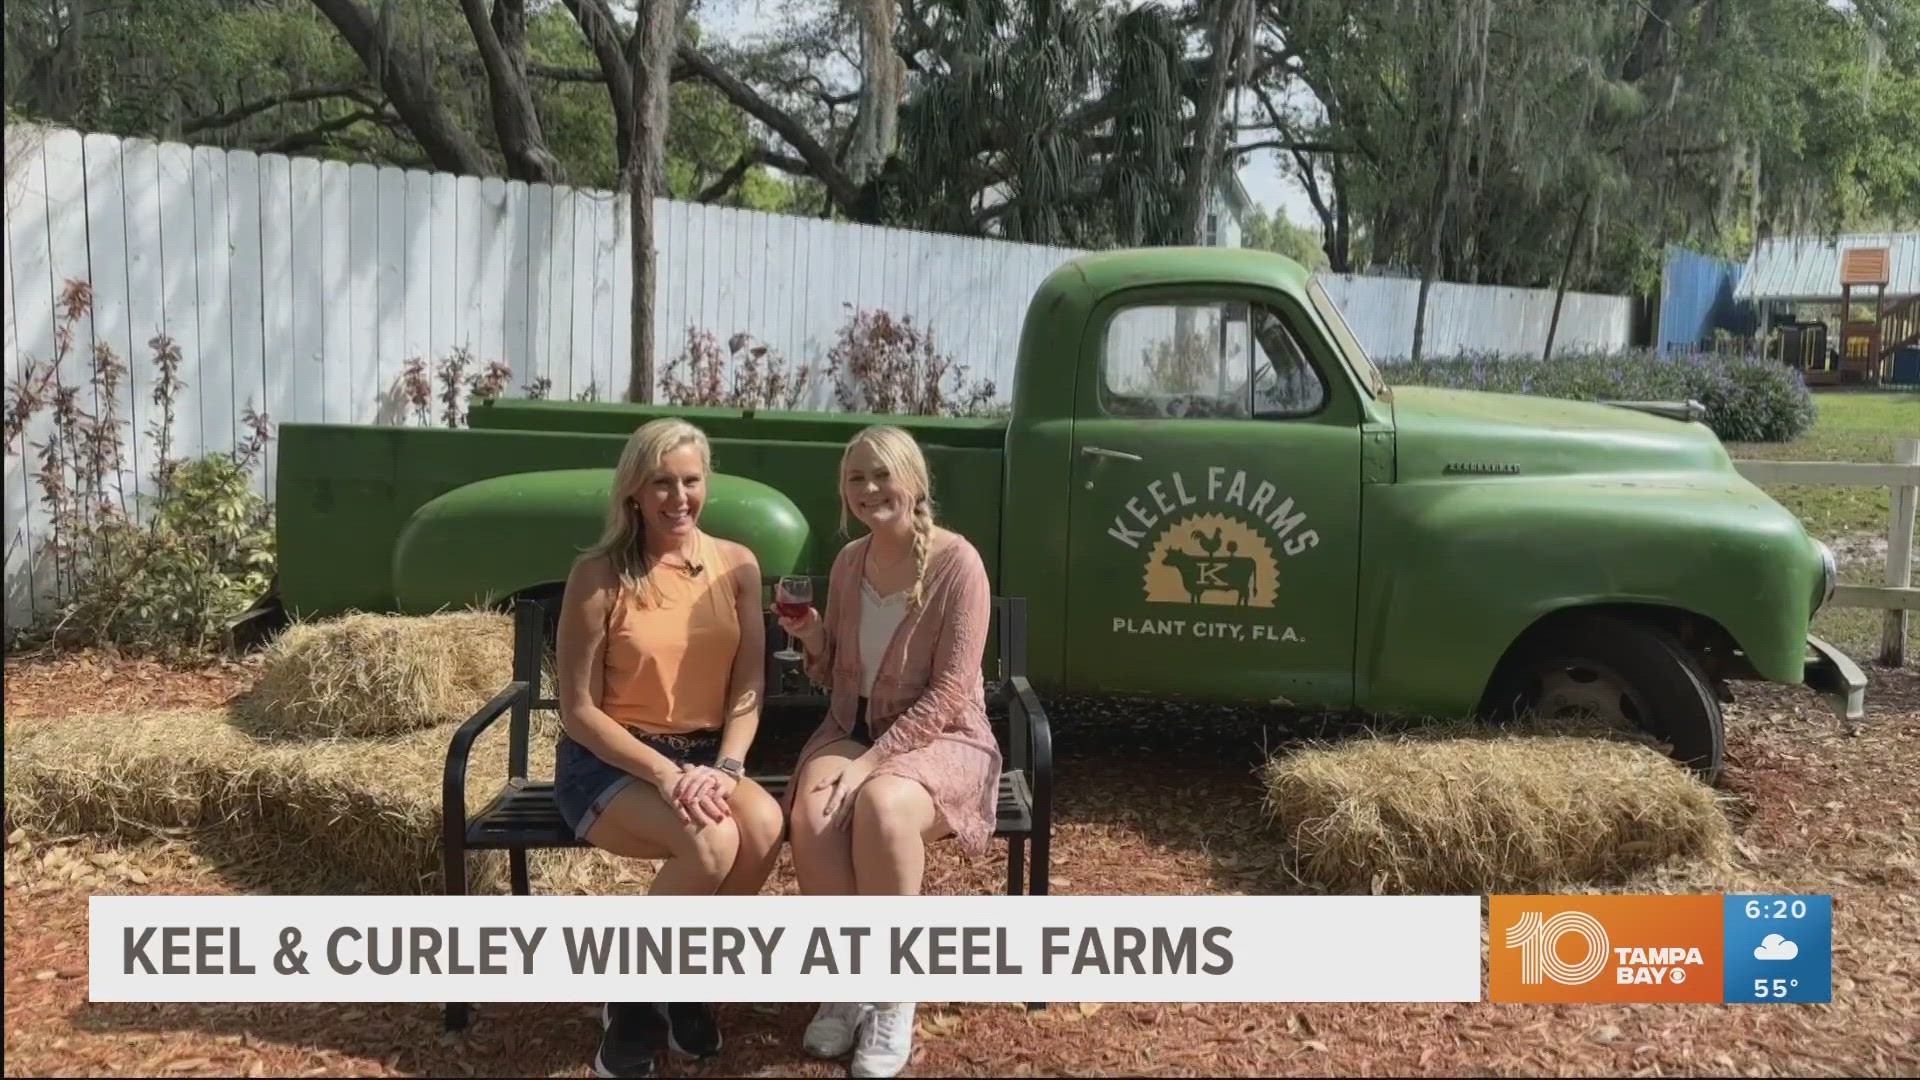 Along with tours of the Keel and Curley Winery, there are tours of the farm and blueberry fields and even visits with animals.